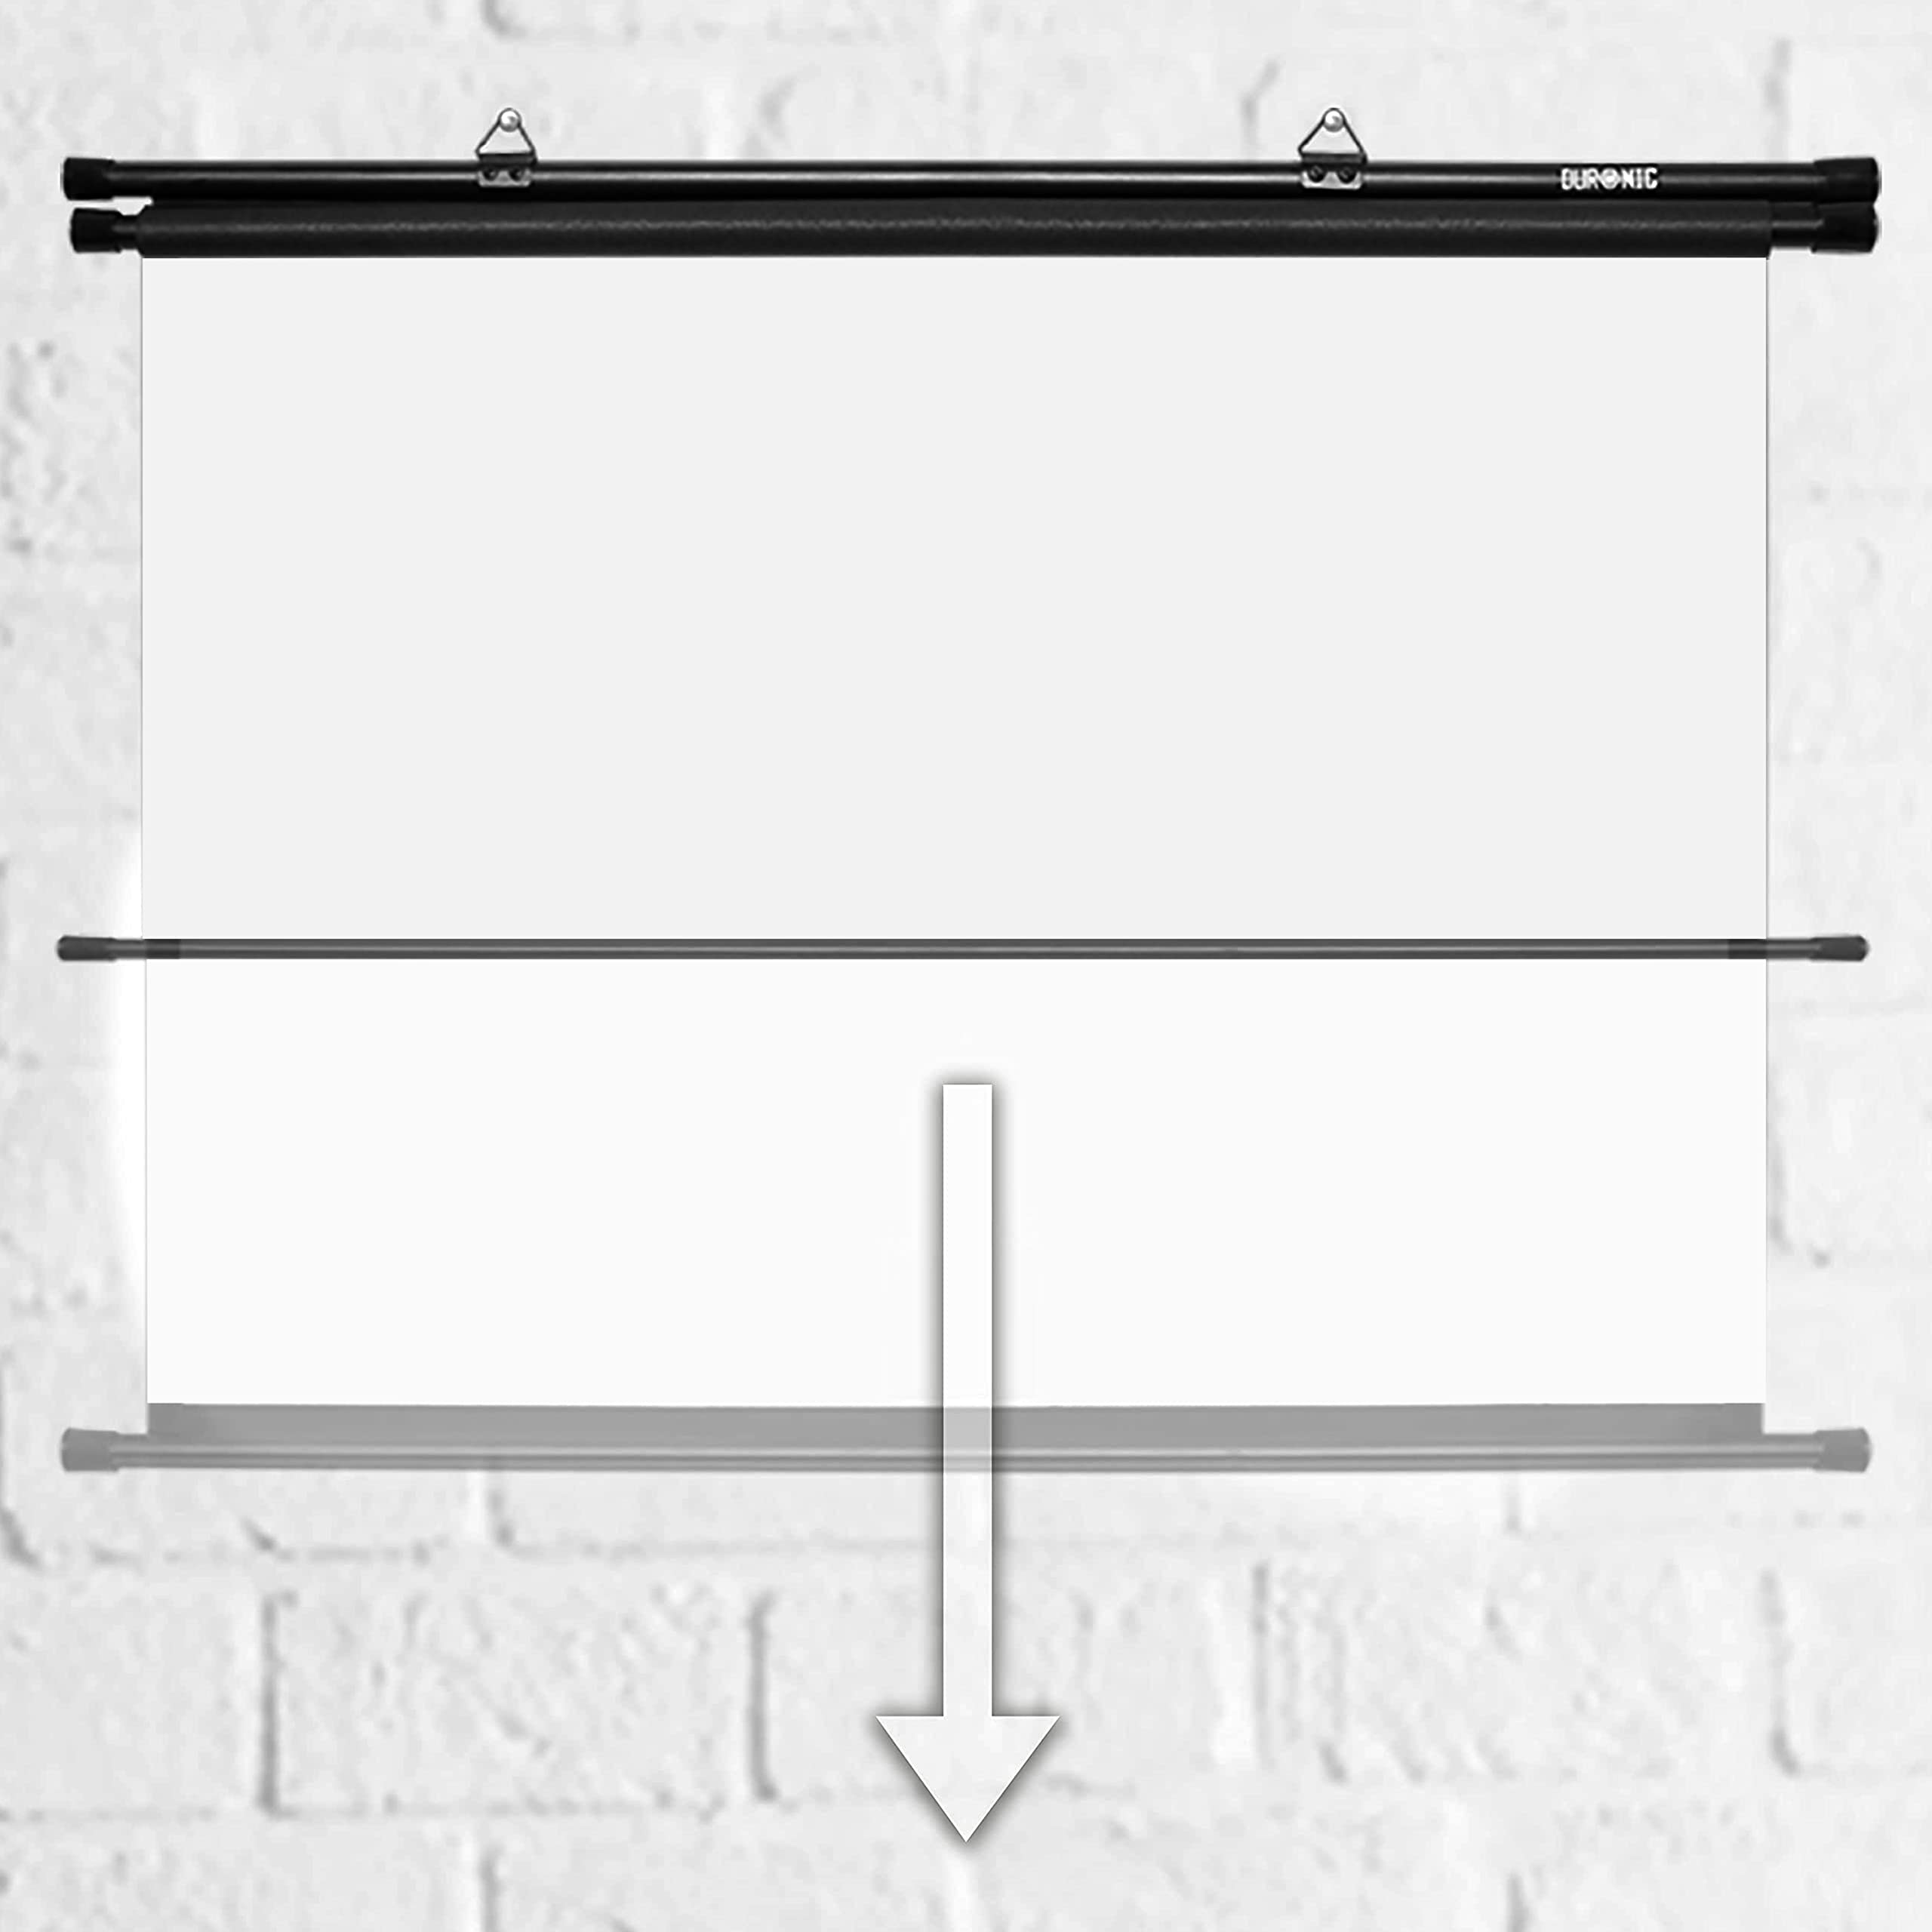 Duronic Projector Screen BPS40/43 | Projection Screen Size: 81x61cm / 31x24” | 4:3 Ratio | Matt White +1 Gain | HD High Definition | Wall or Ceiling Mountable | Home Cinema School Office